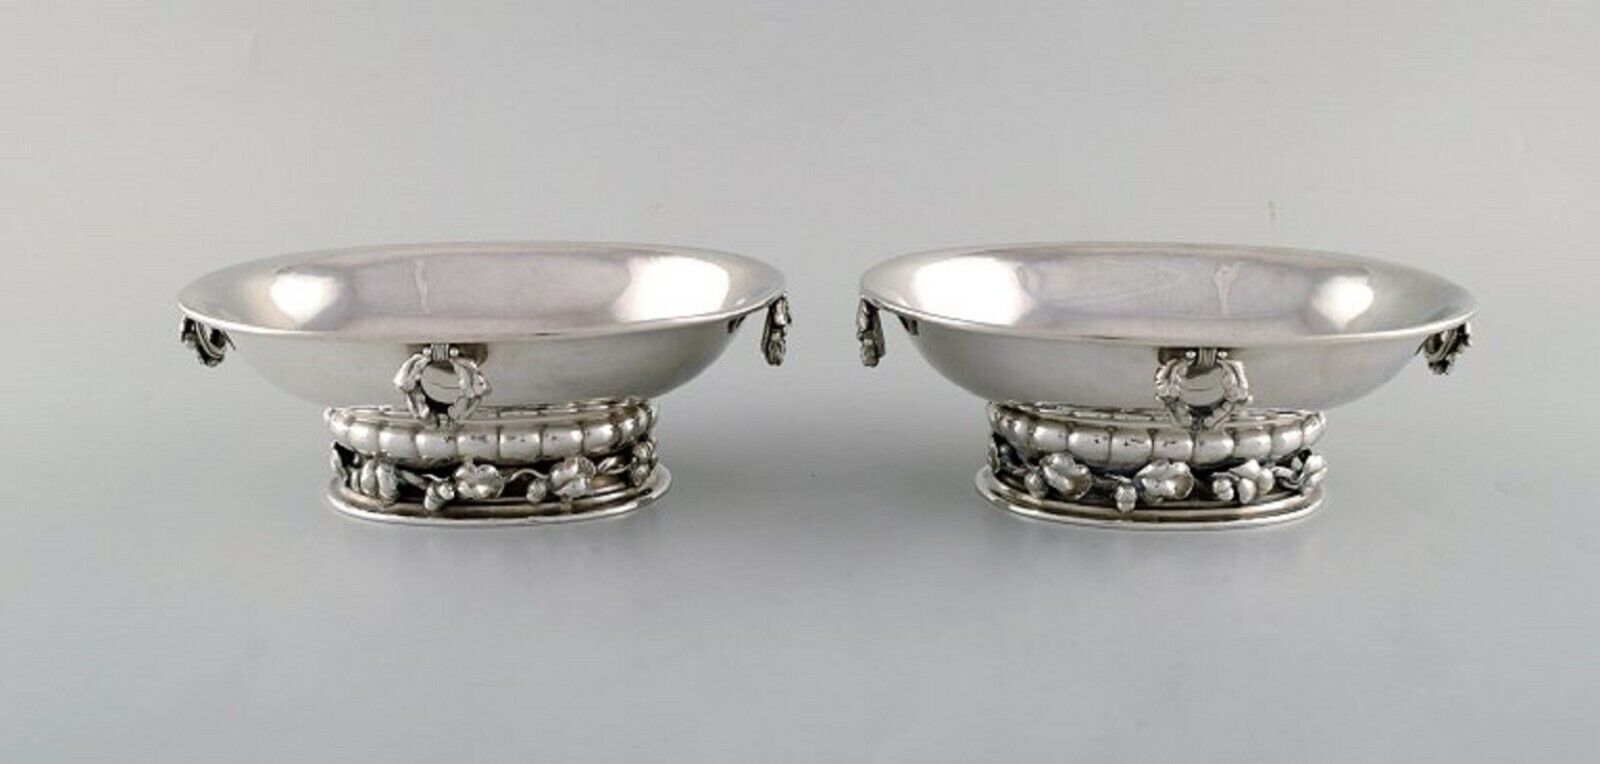 A pair of rare Georg Jensen jardiniere in sterling silver. 1925-1932